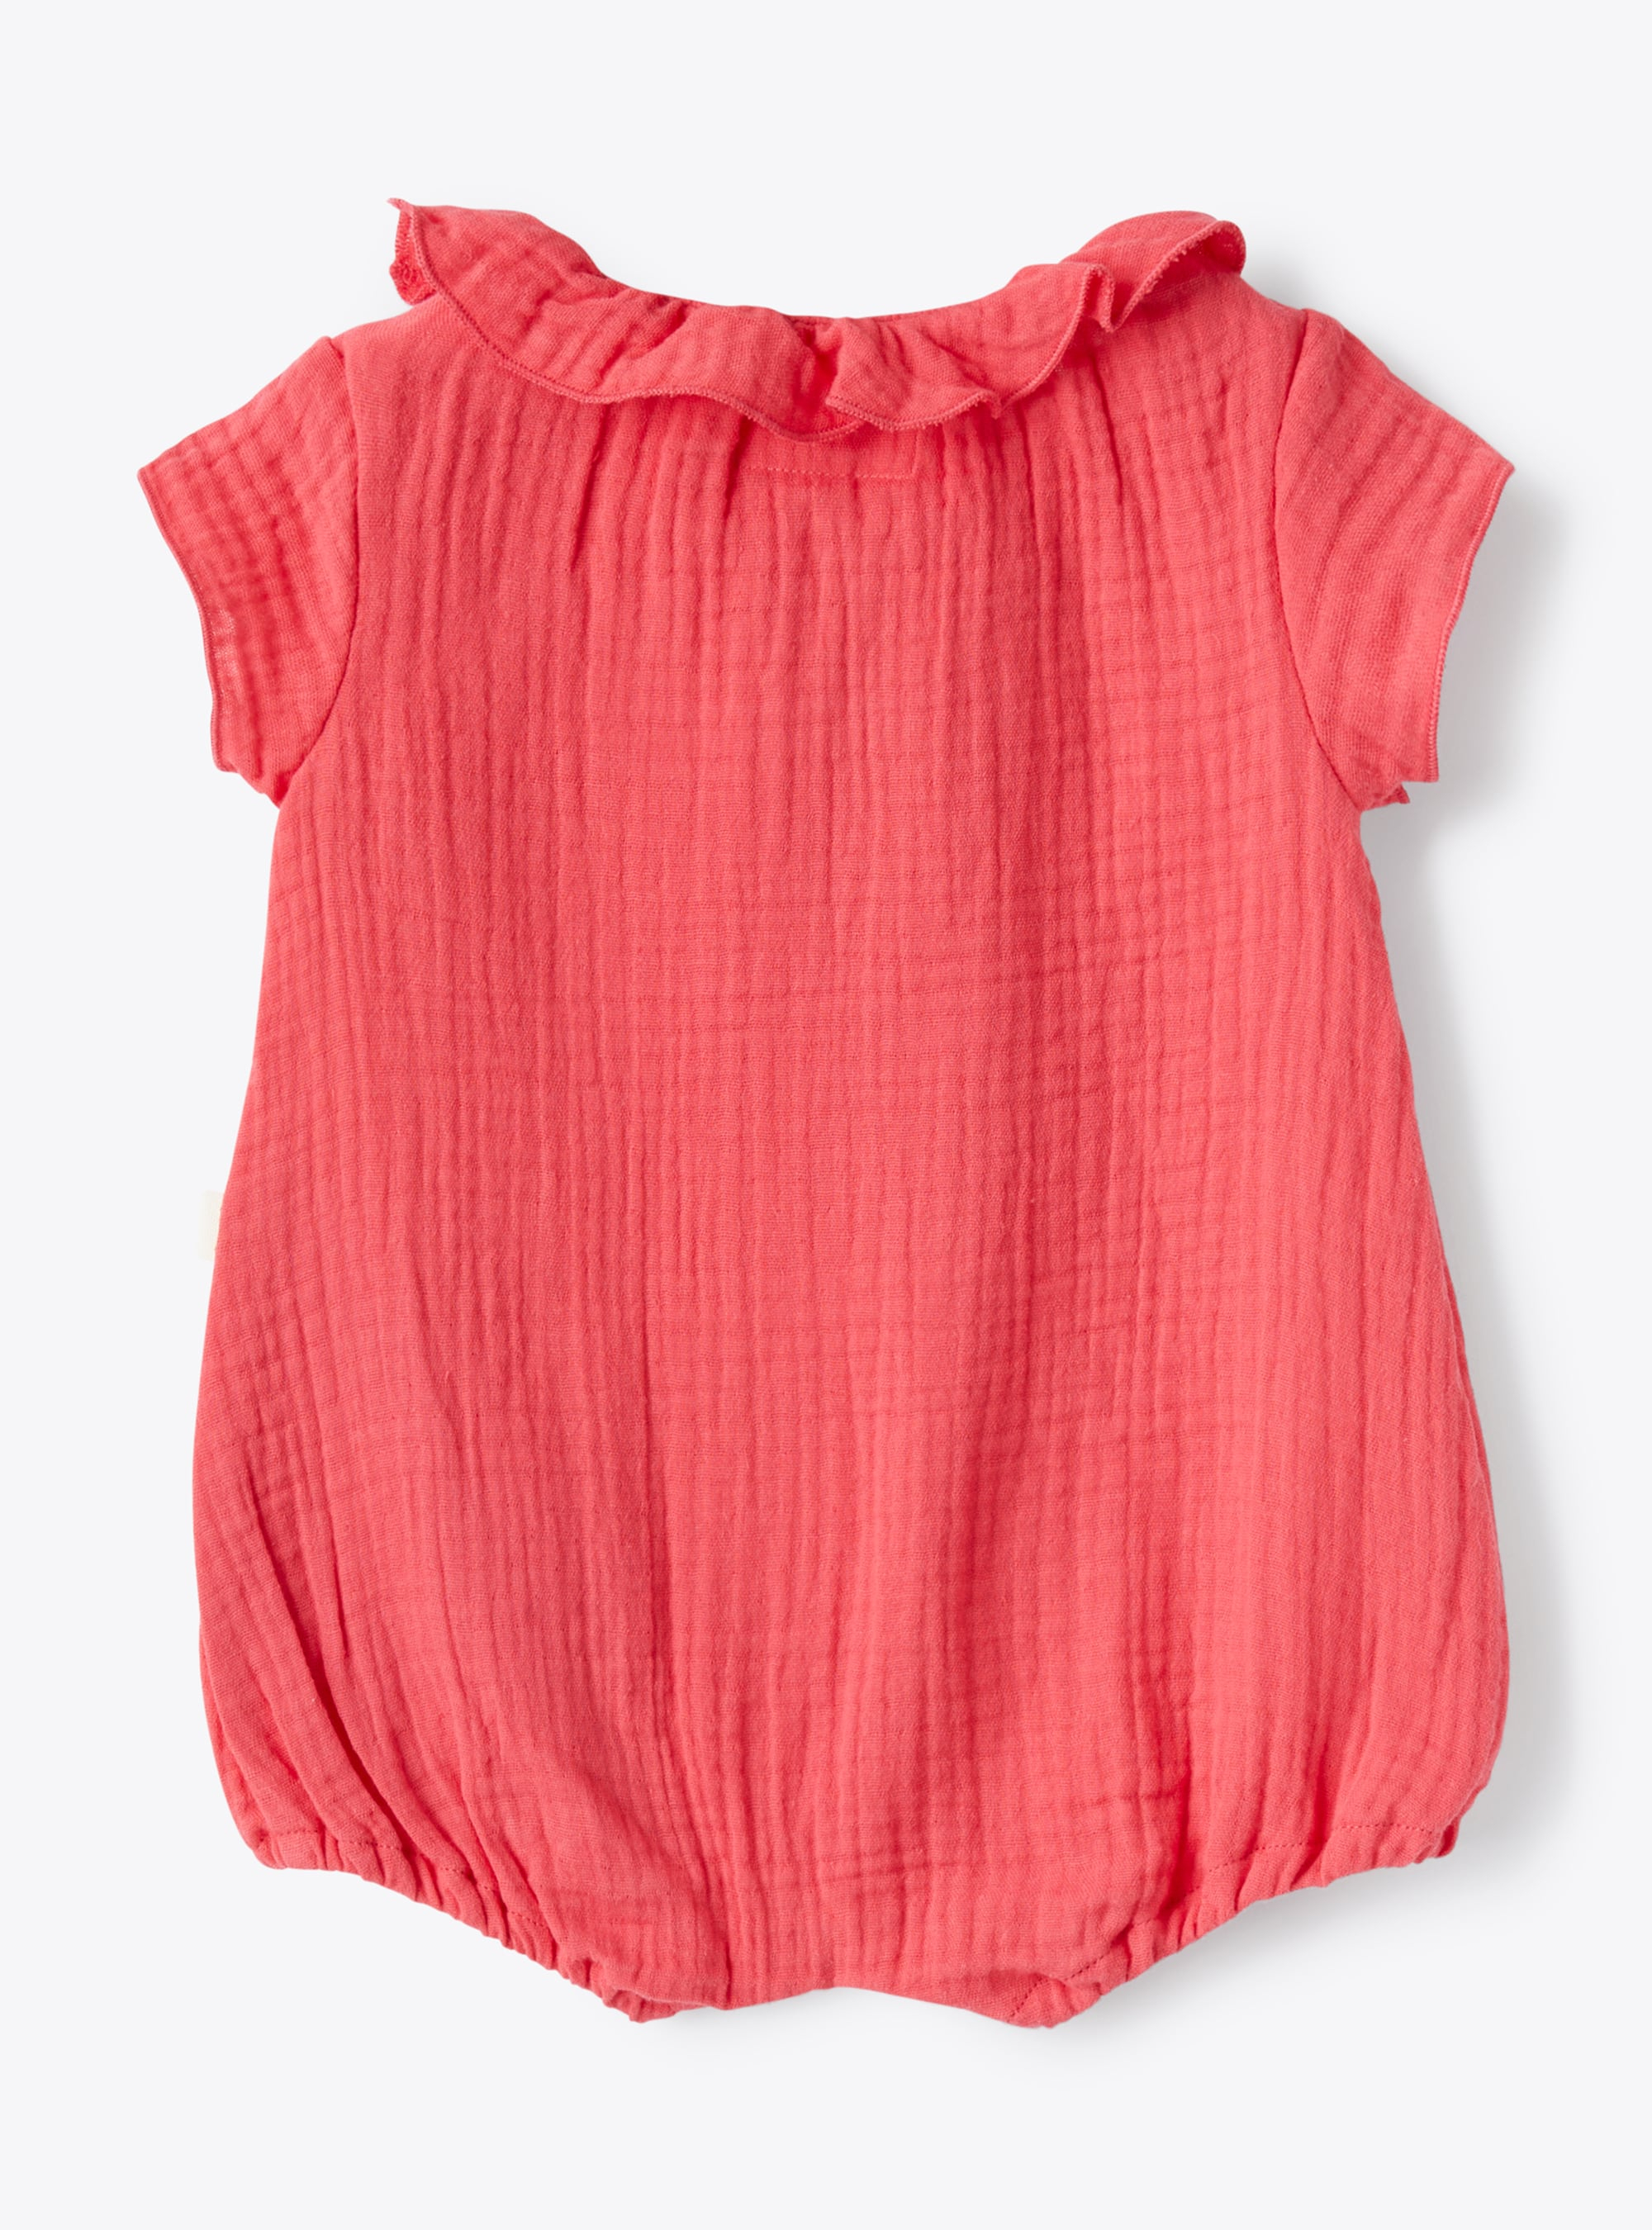 Romper suit in strawberry-red organic cotton gauze - Red | Il Gufo